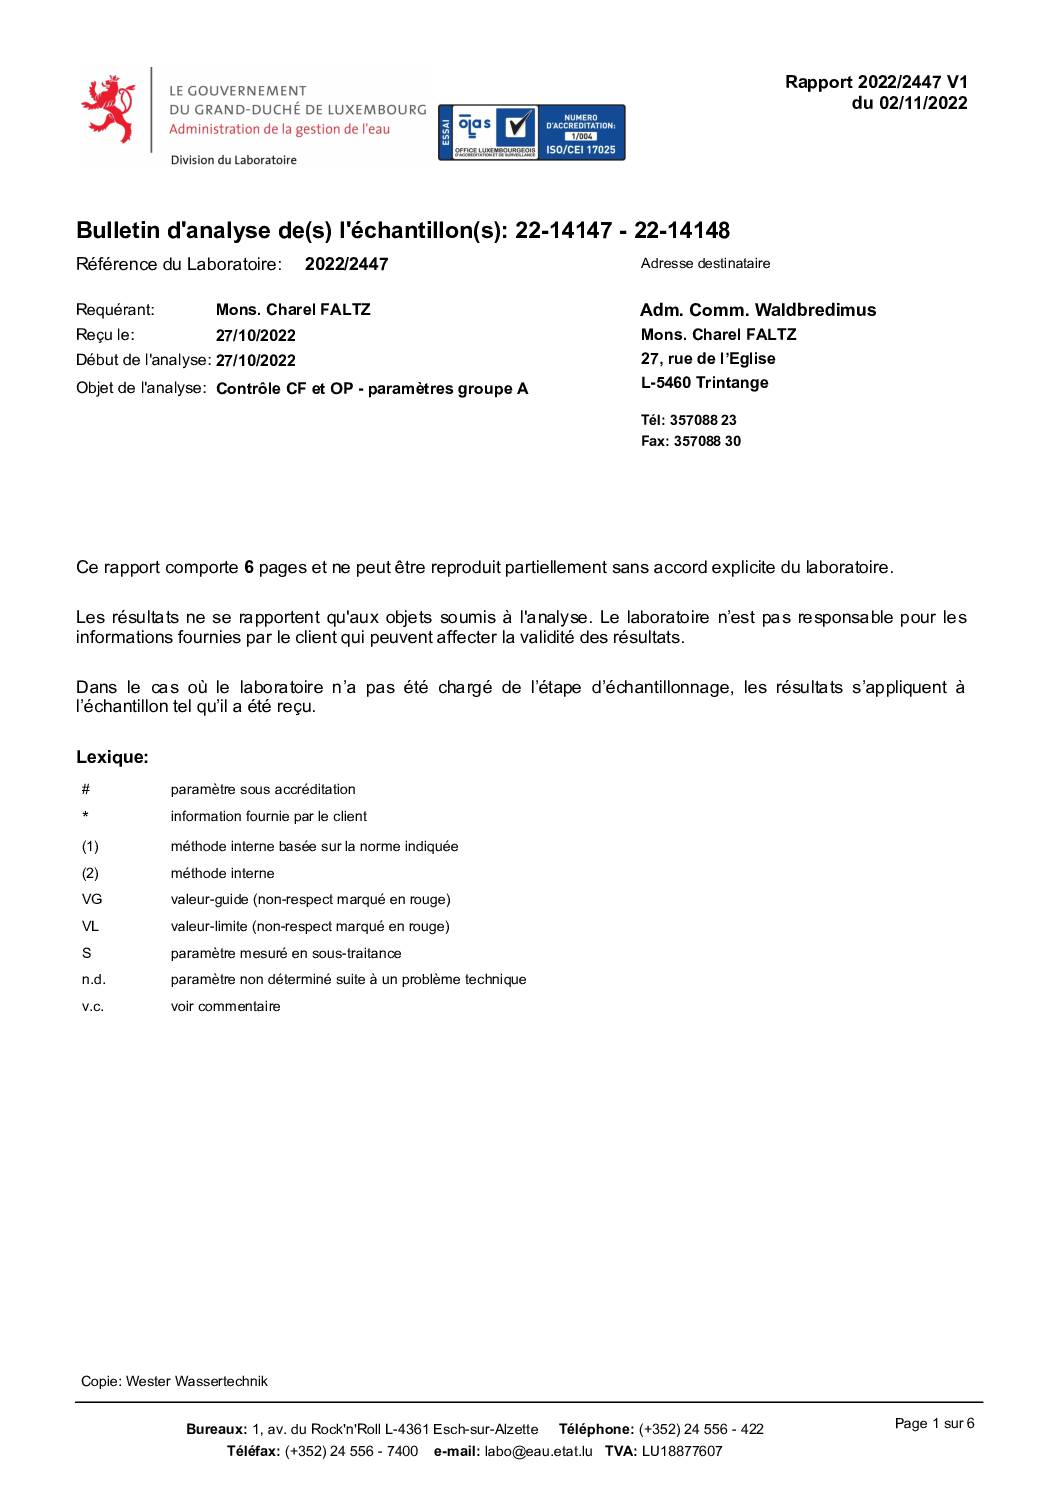 Rapport AGE 02.11.2022